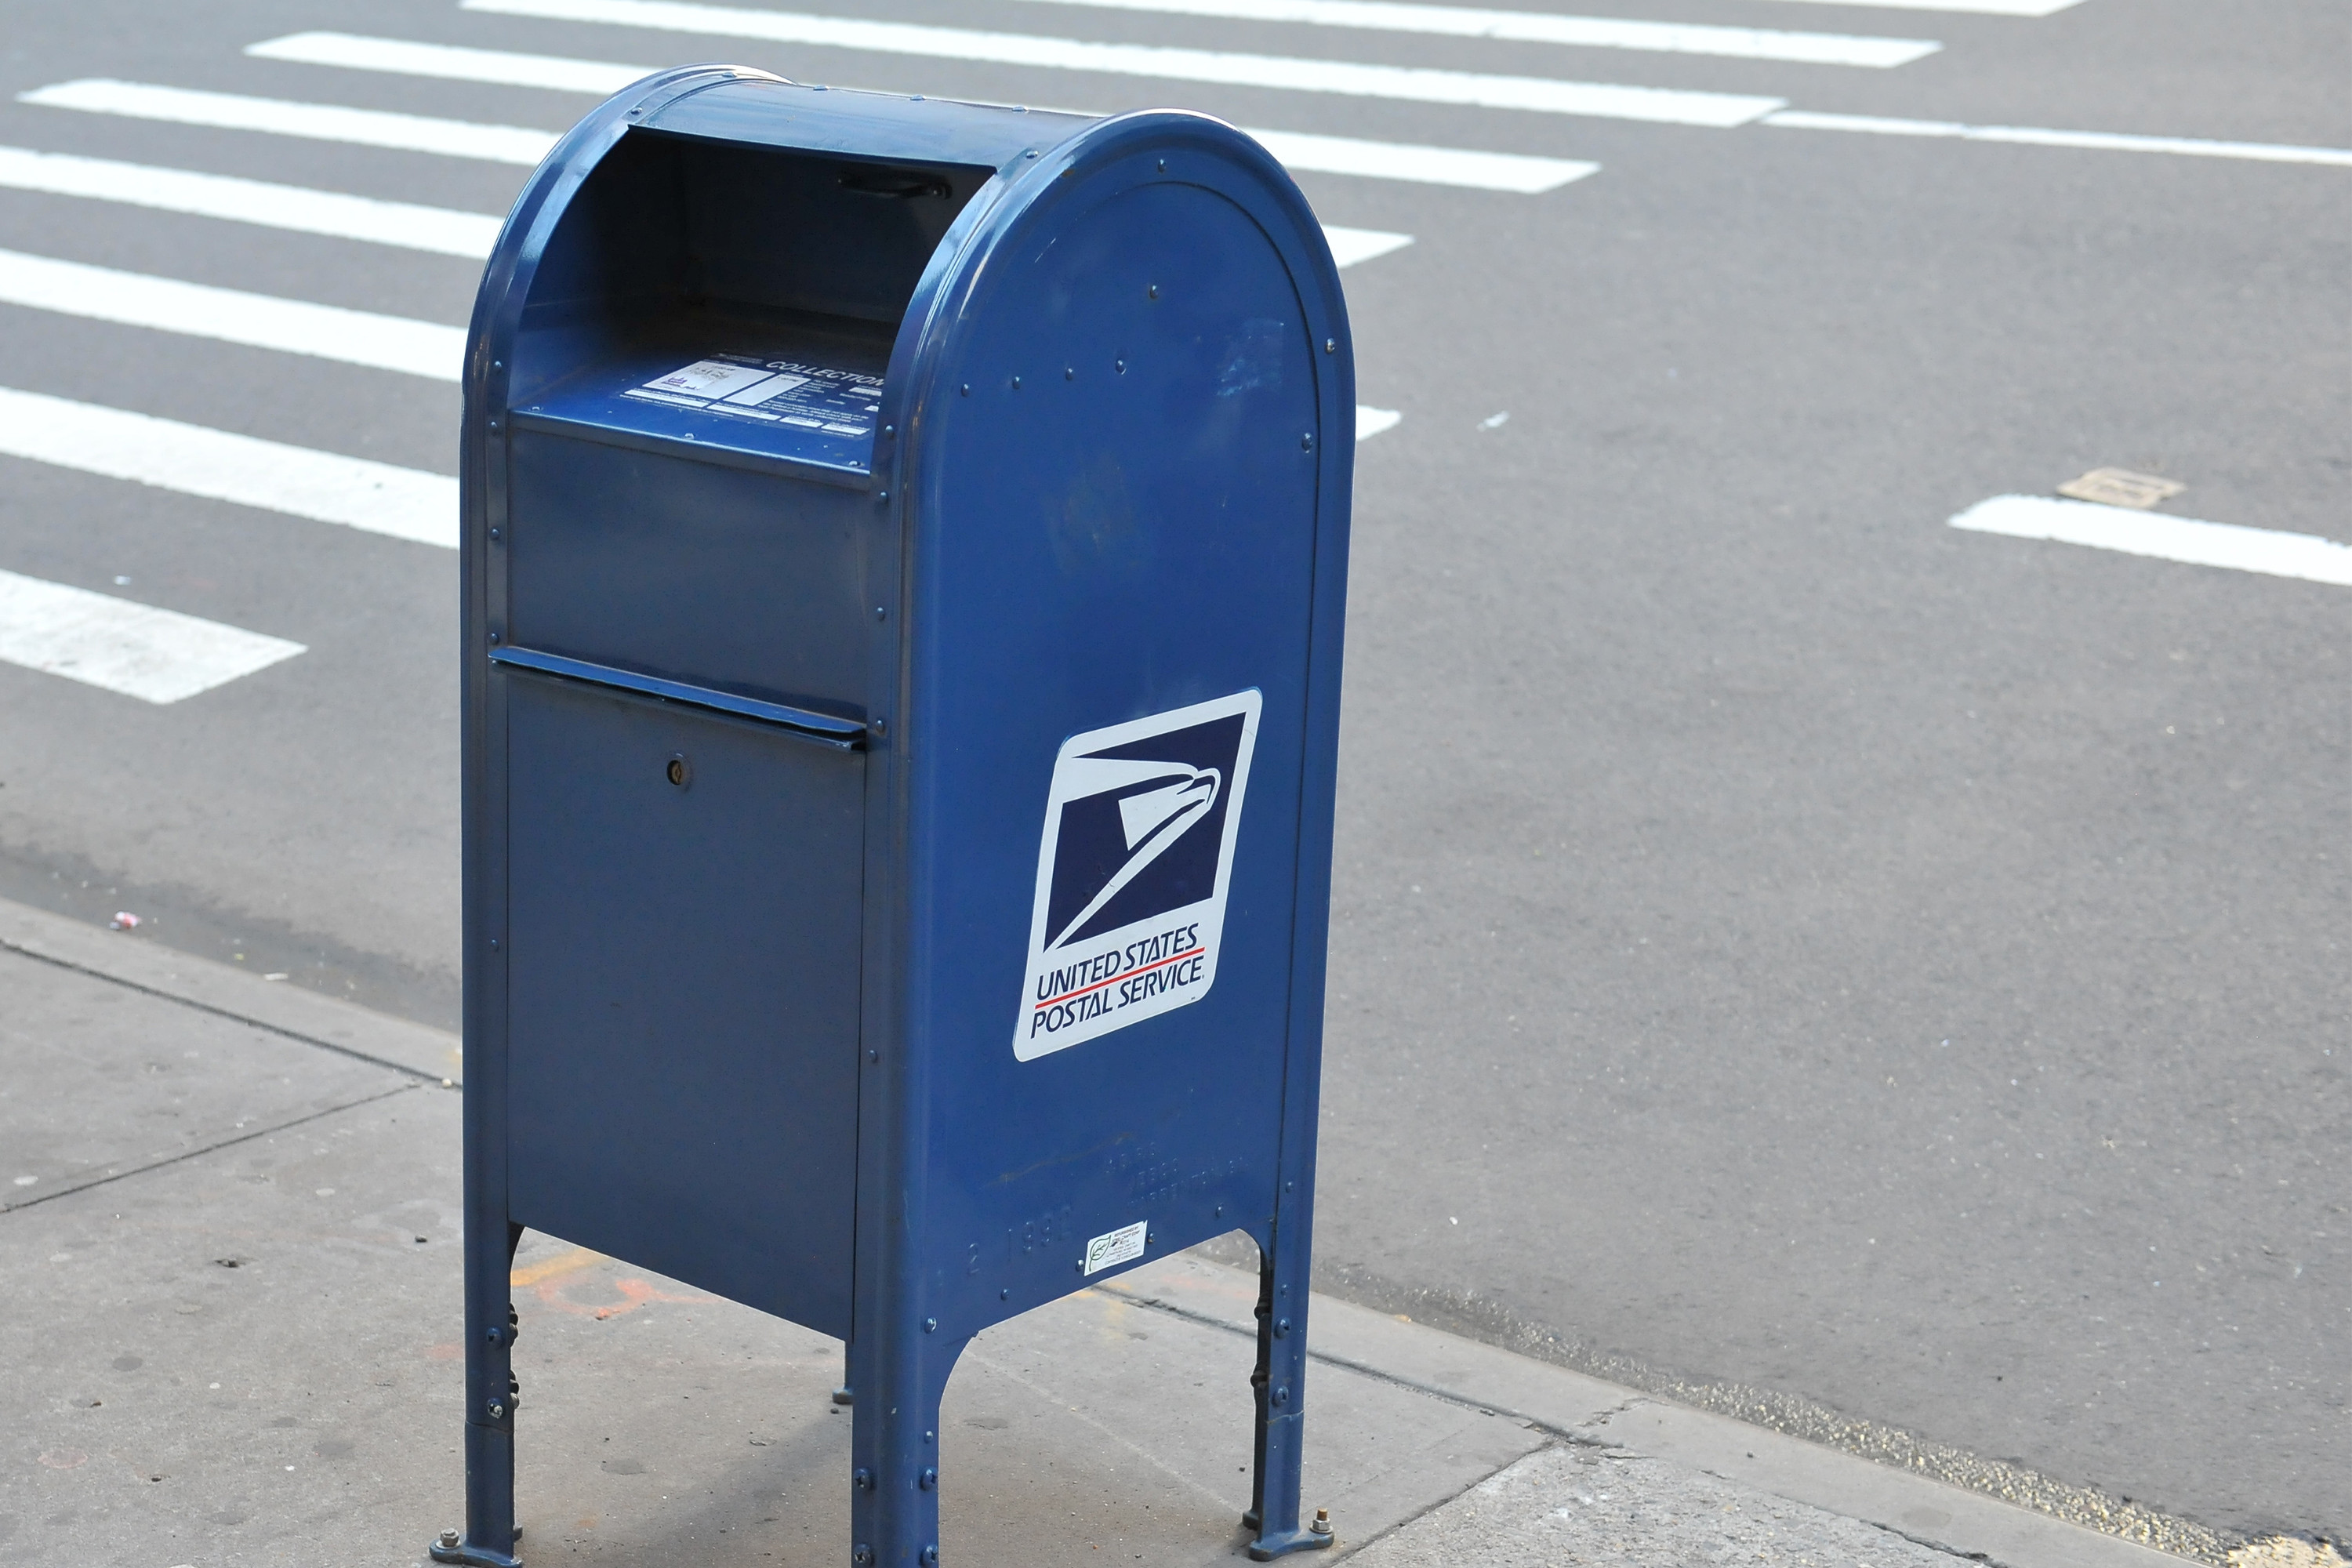 Cops want you to stop mailing checks using blue postal boxes